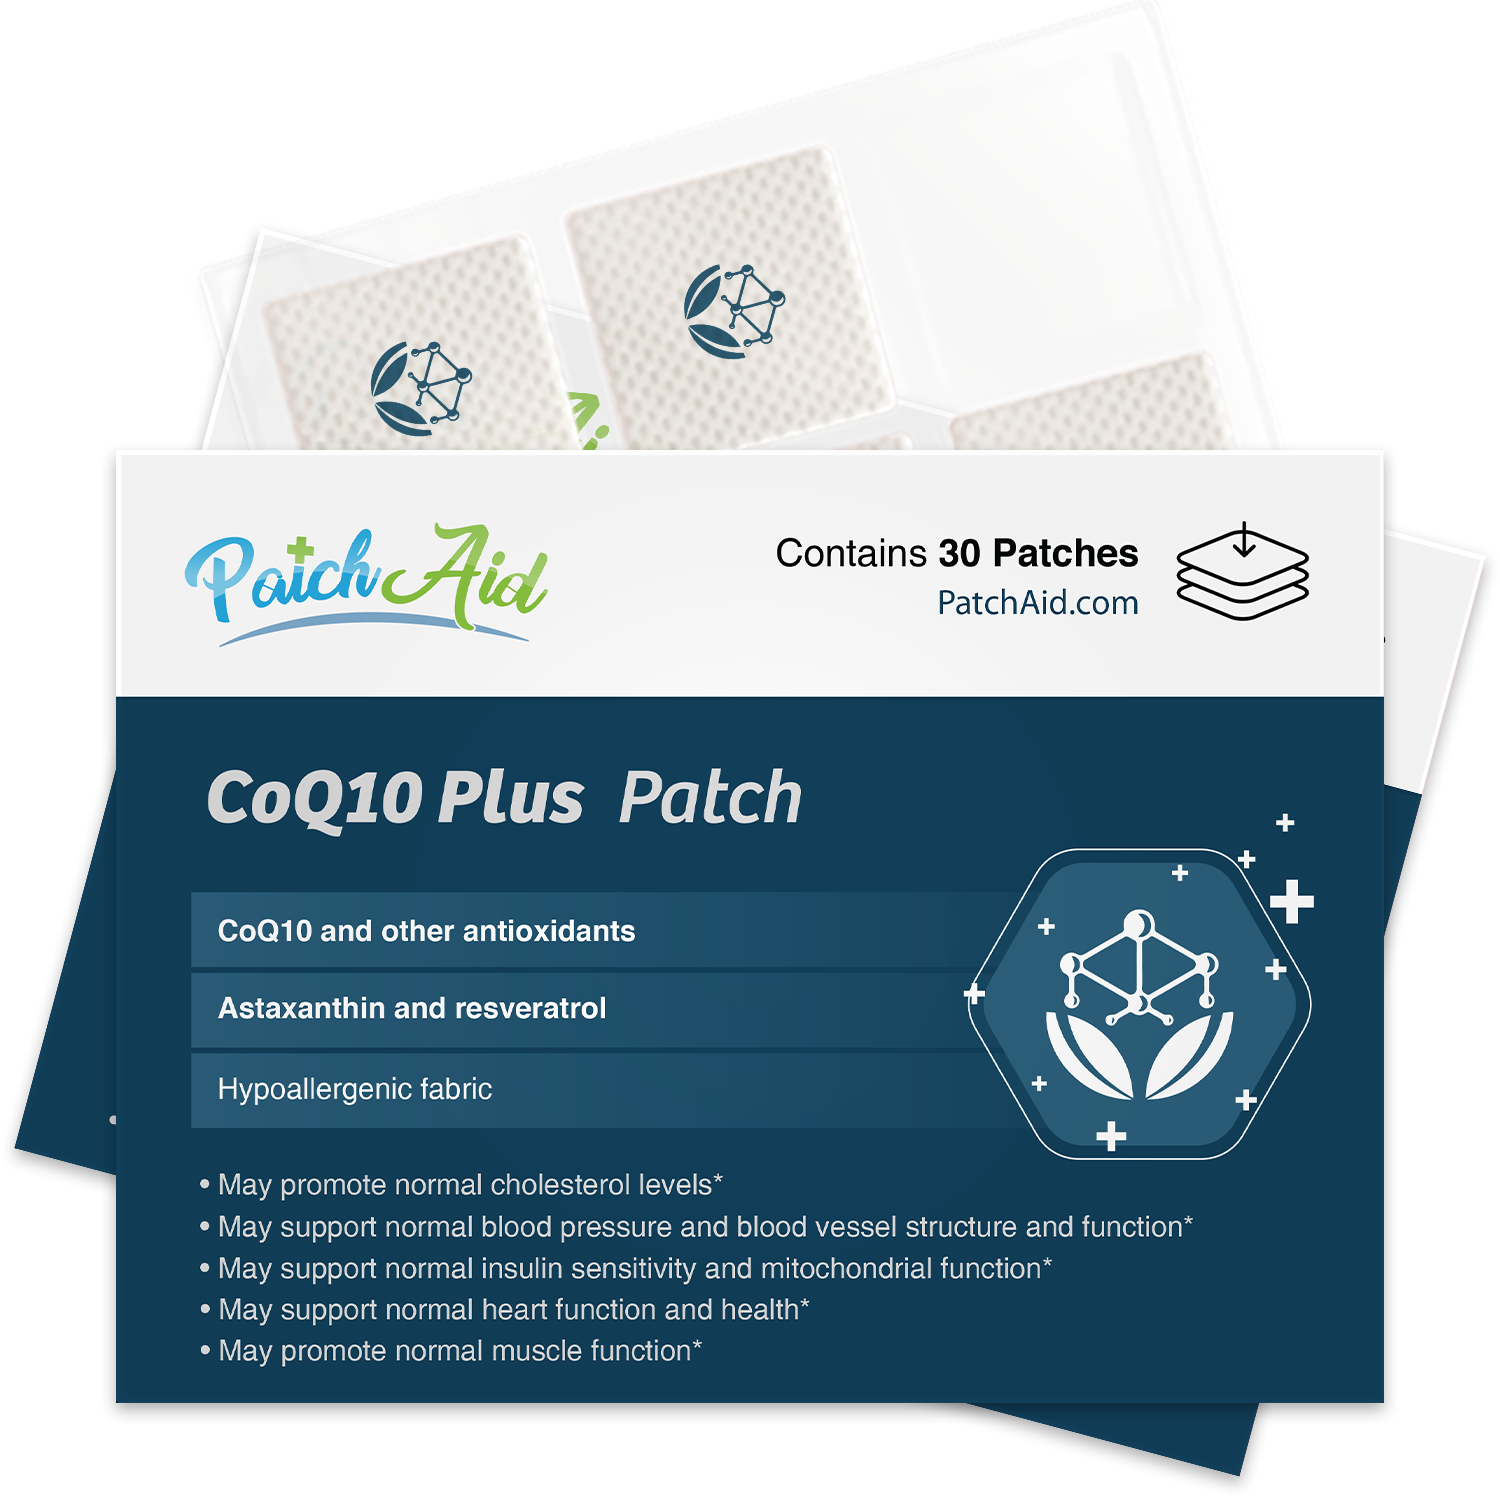 CoQ10 Plus Patch by PatchAid